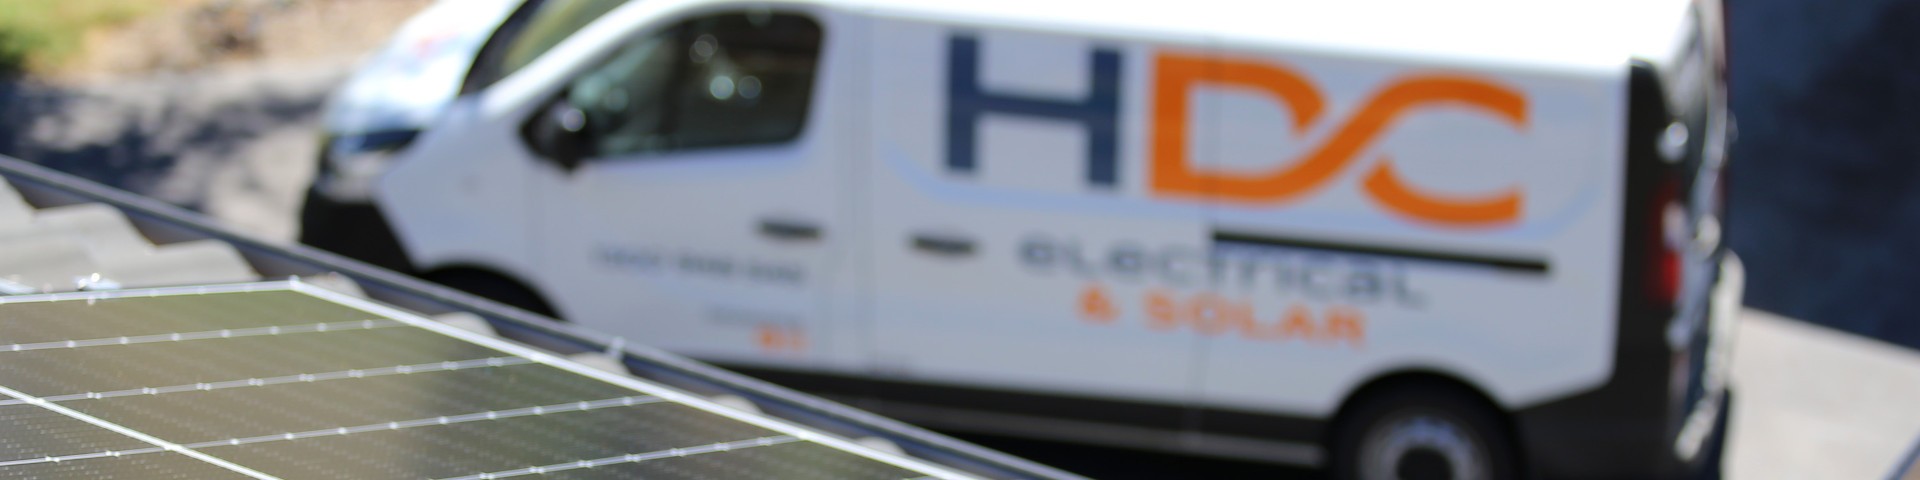 HDC Electrical and Solar van parked near a roof with solar panels.